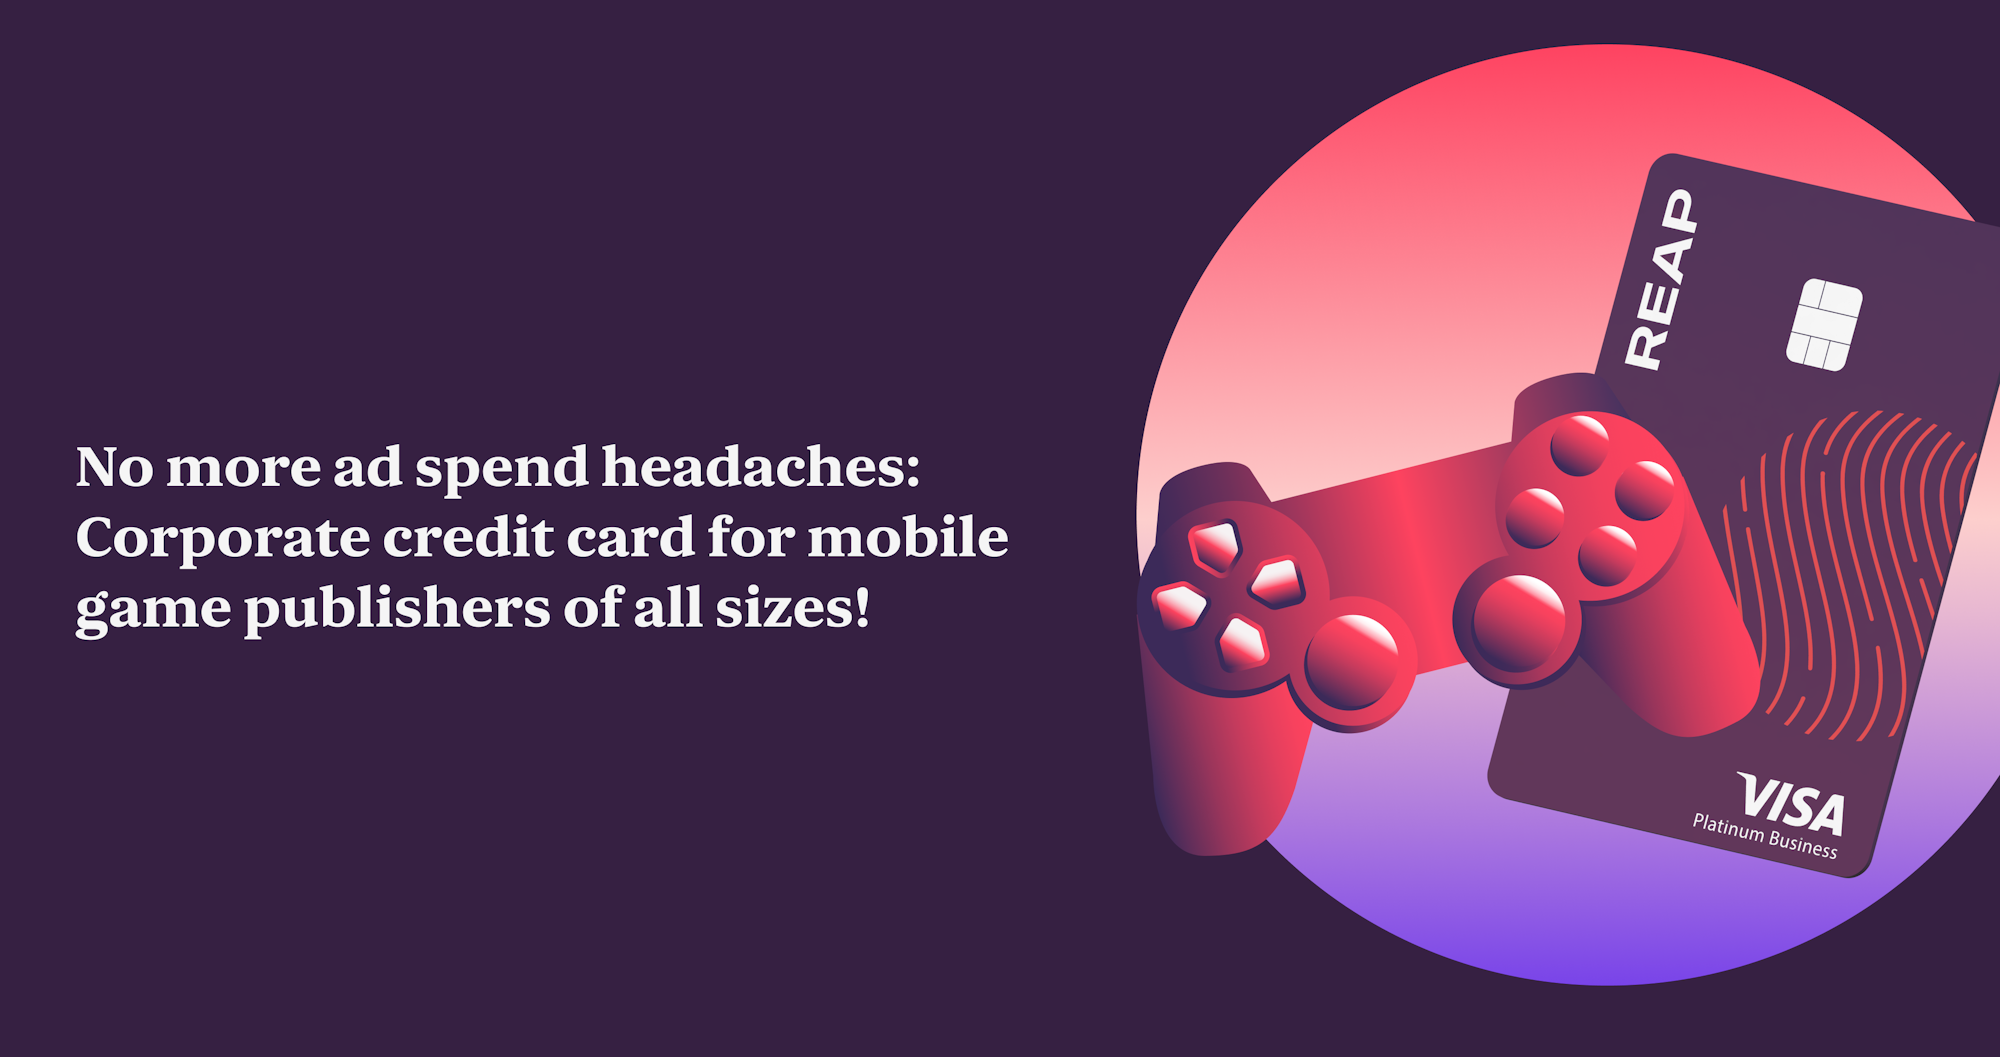 Cover Image for No more ad spend headaches: Corporate credit card for mobile game publishers of all sizes!